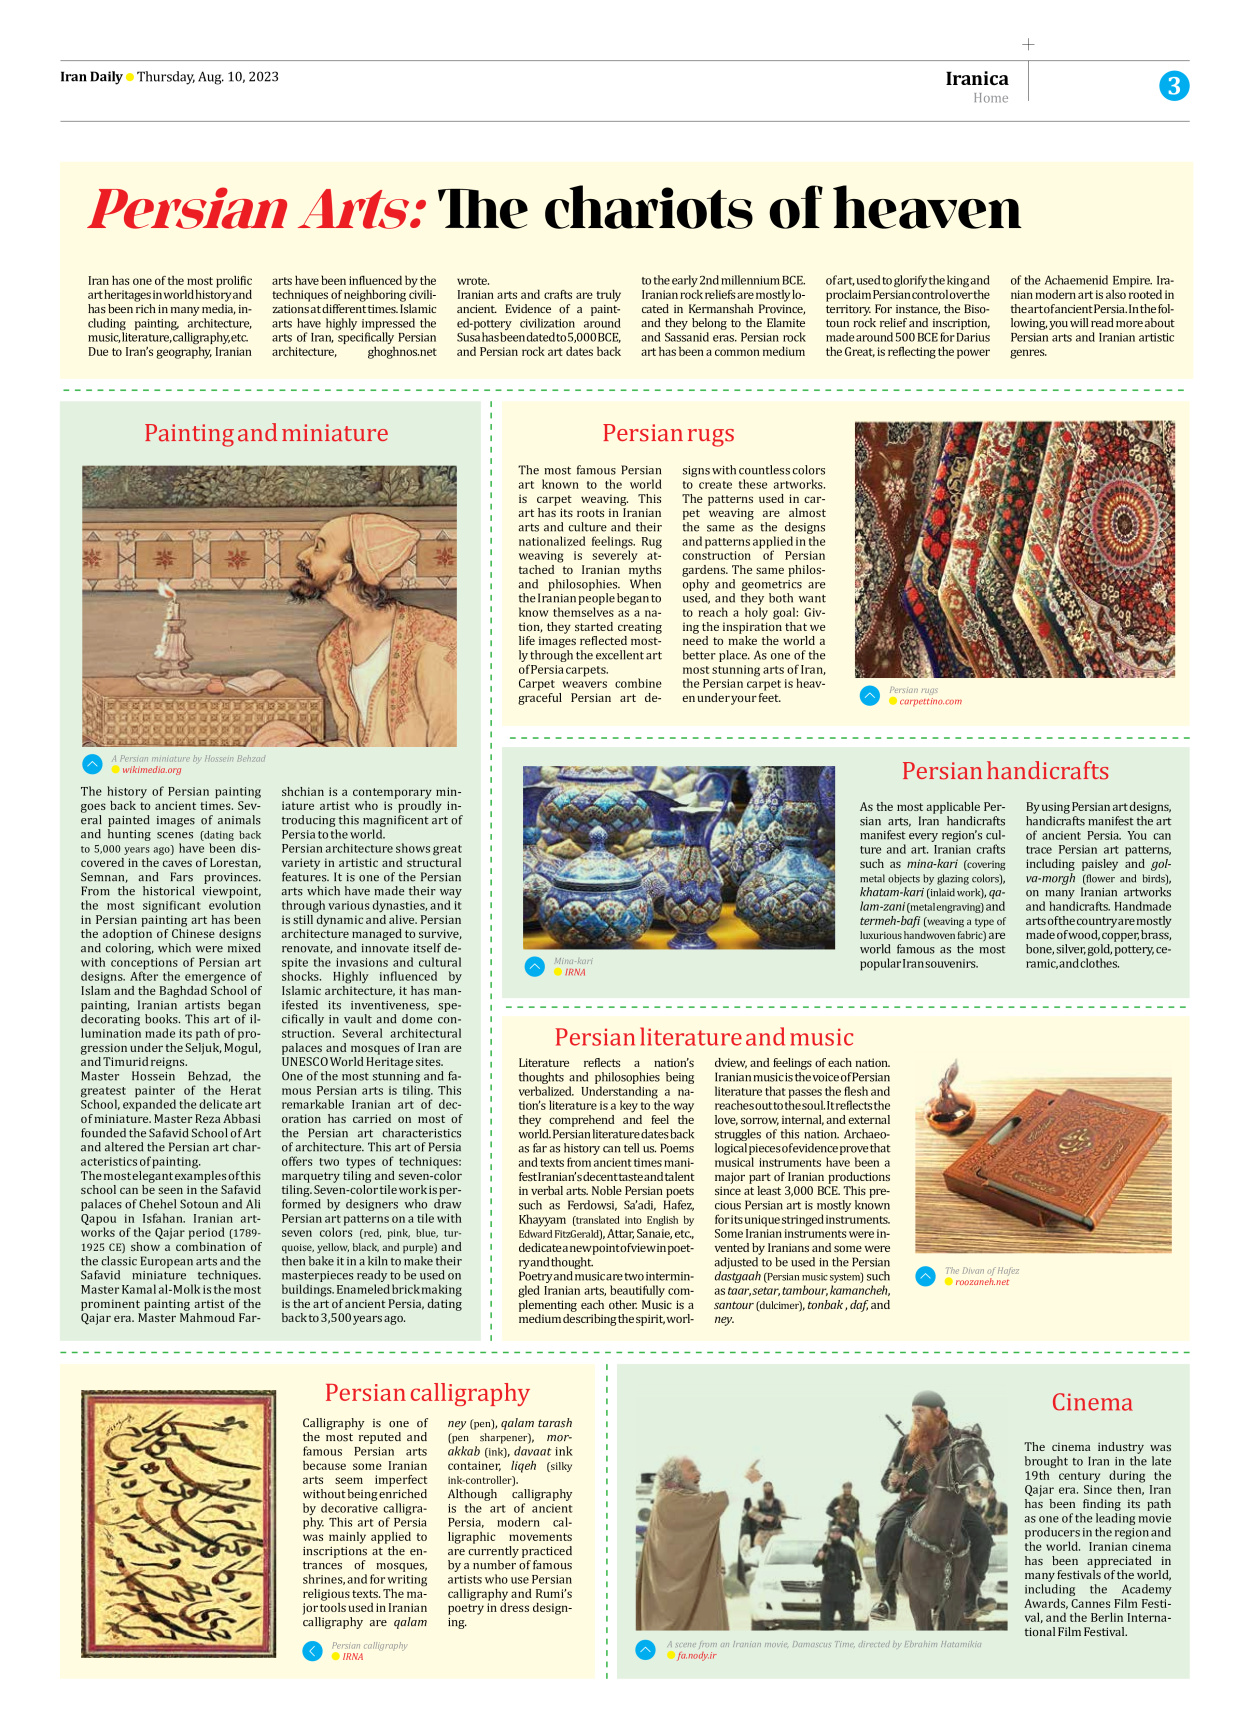 Iran Daily - Number Seven Thousand Three Hundred and Fifty Nine - 10 August 2023 - Page 3